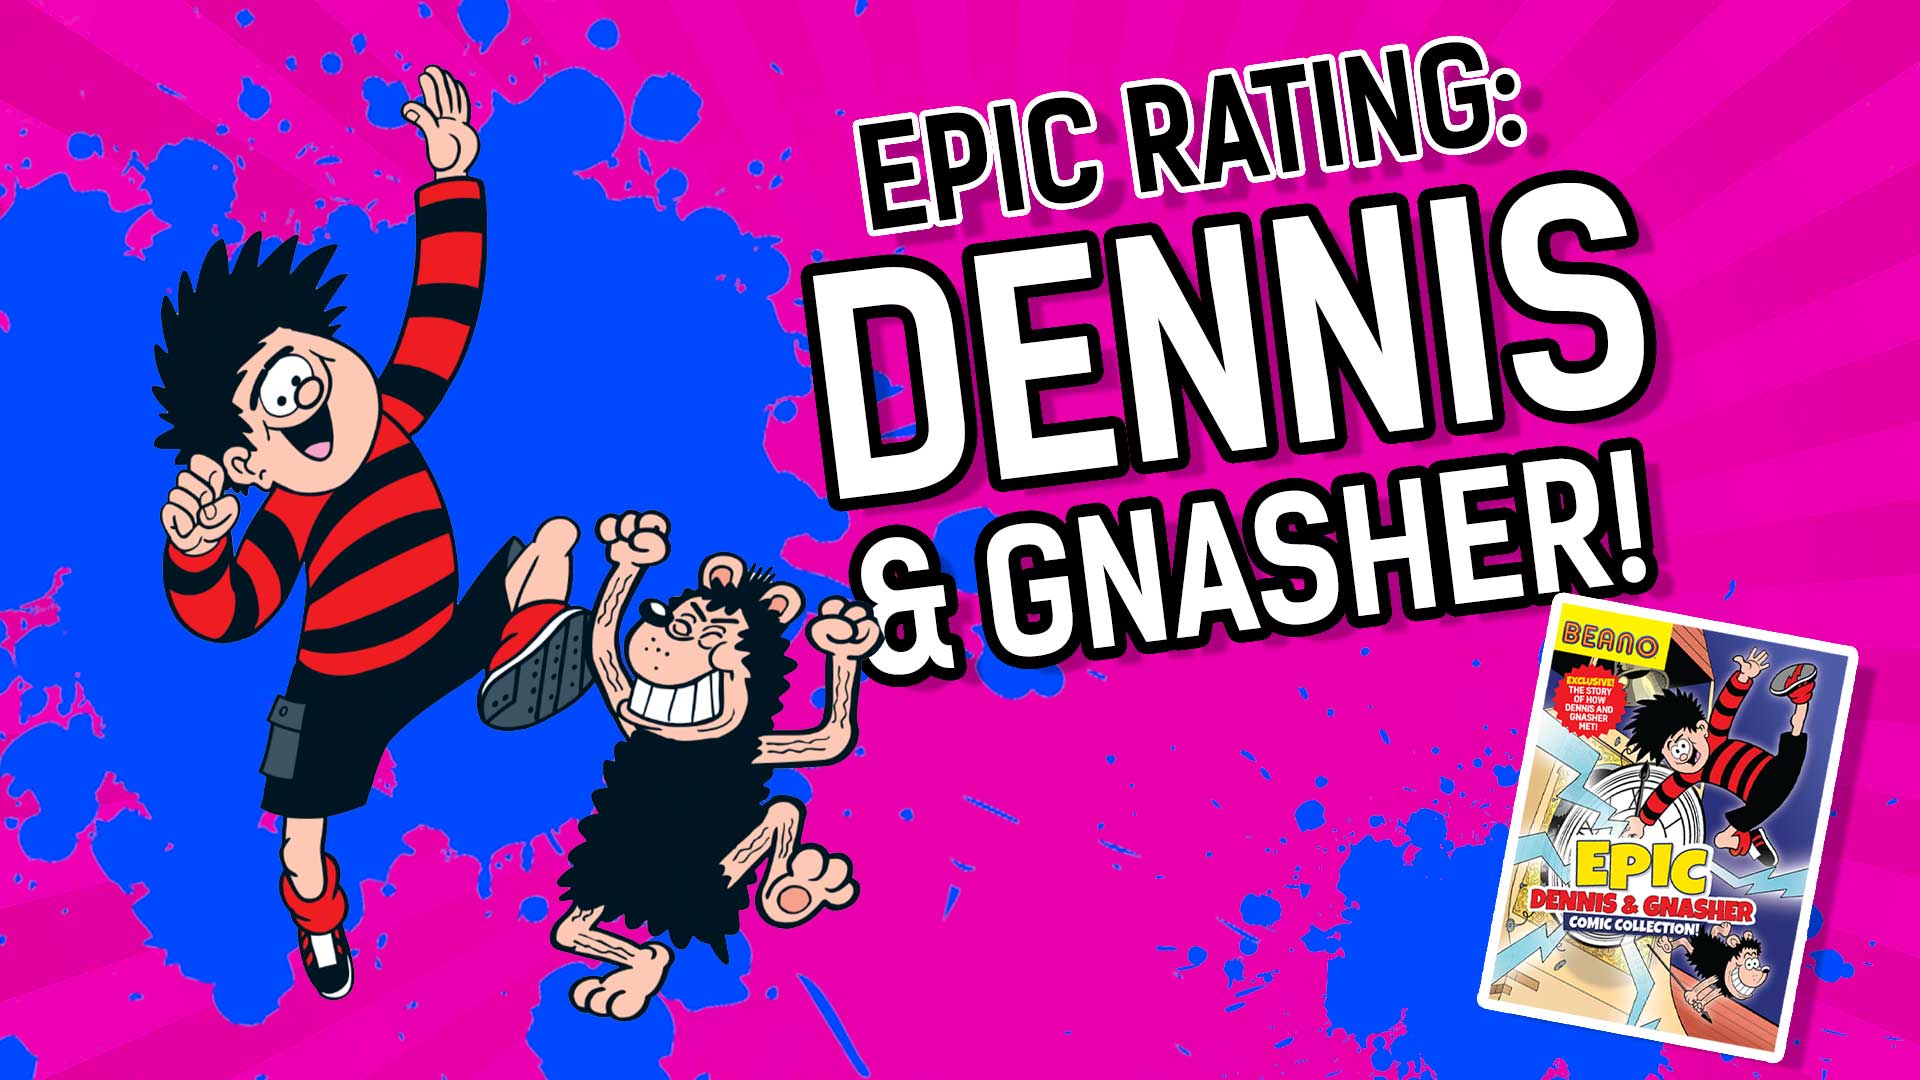 Epic Rating: Dennis and Gnasher